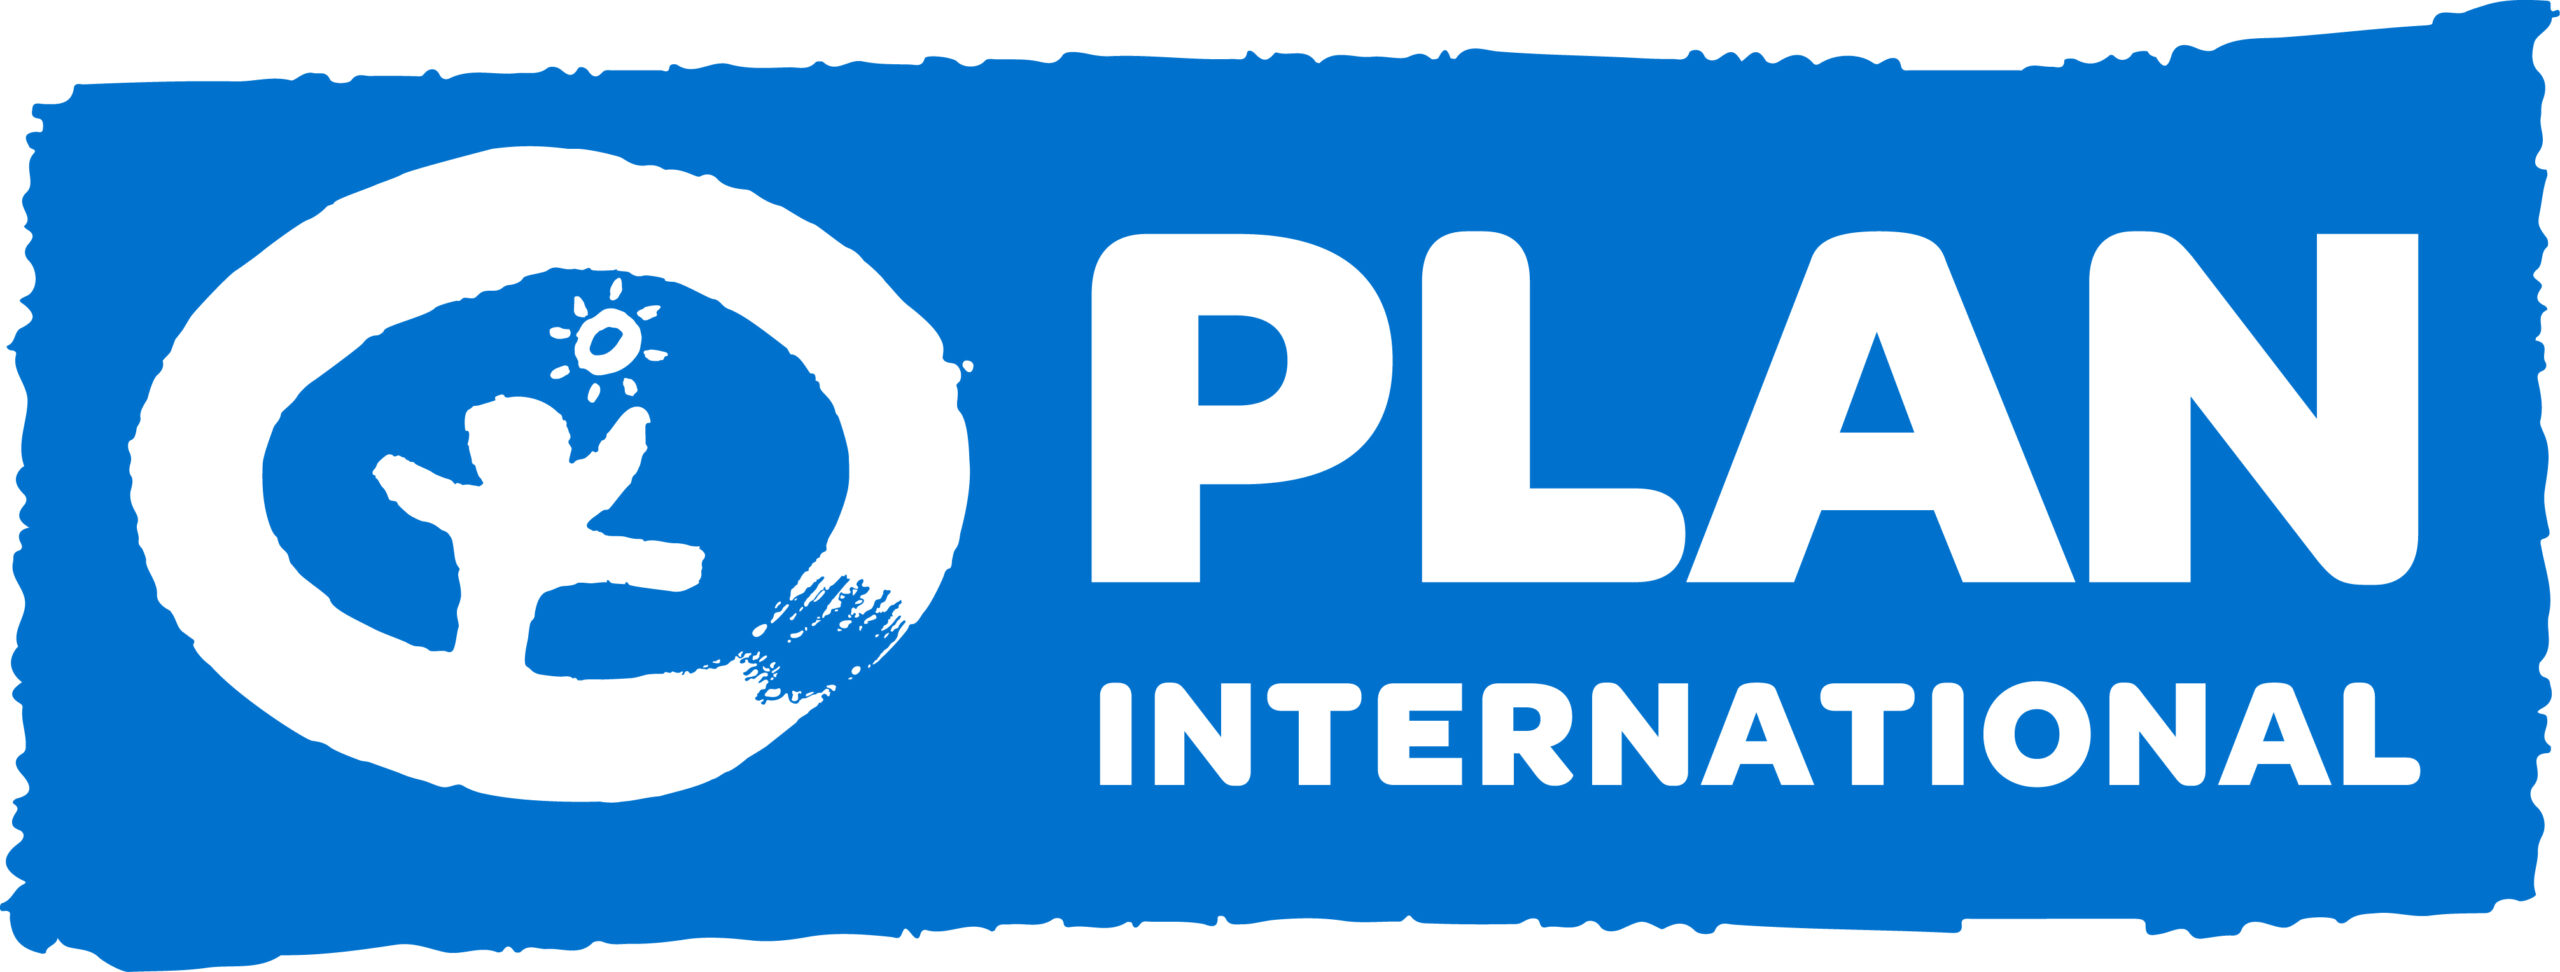 The Plan International logo is common to all our communications. It represents us and, as such, must be reproduced consistently. The Plan International logo is made up of three components  the symbol, logo and highlight. 

The Plan International logo is intended as a shorthand, defining the organisation we are. The simplistic illustration of the dancing child implies that children are the starting point and focus of our activities. The graphic sun represents the optimism of childhood while the outer circle represents protection within a safe environment.

The blue version of the Plan International logo should be used for most purposes including publications, advertising and stationery.